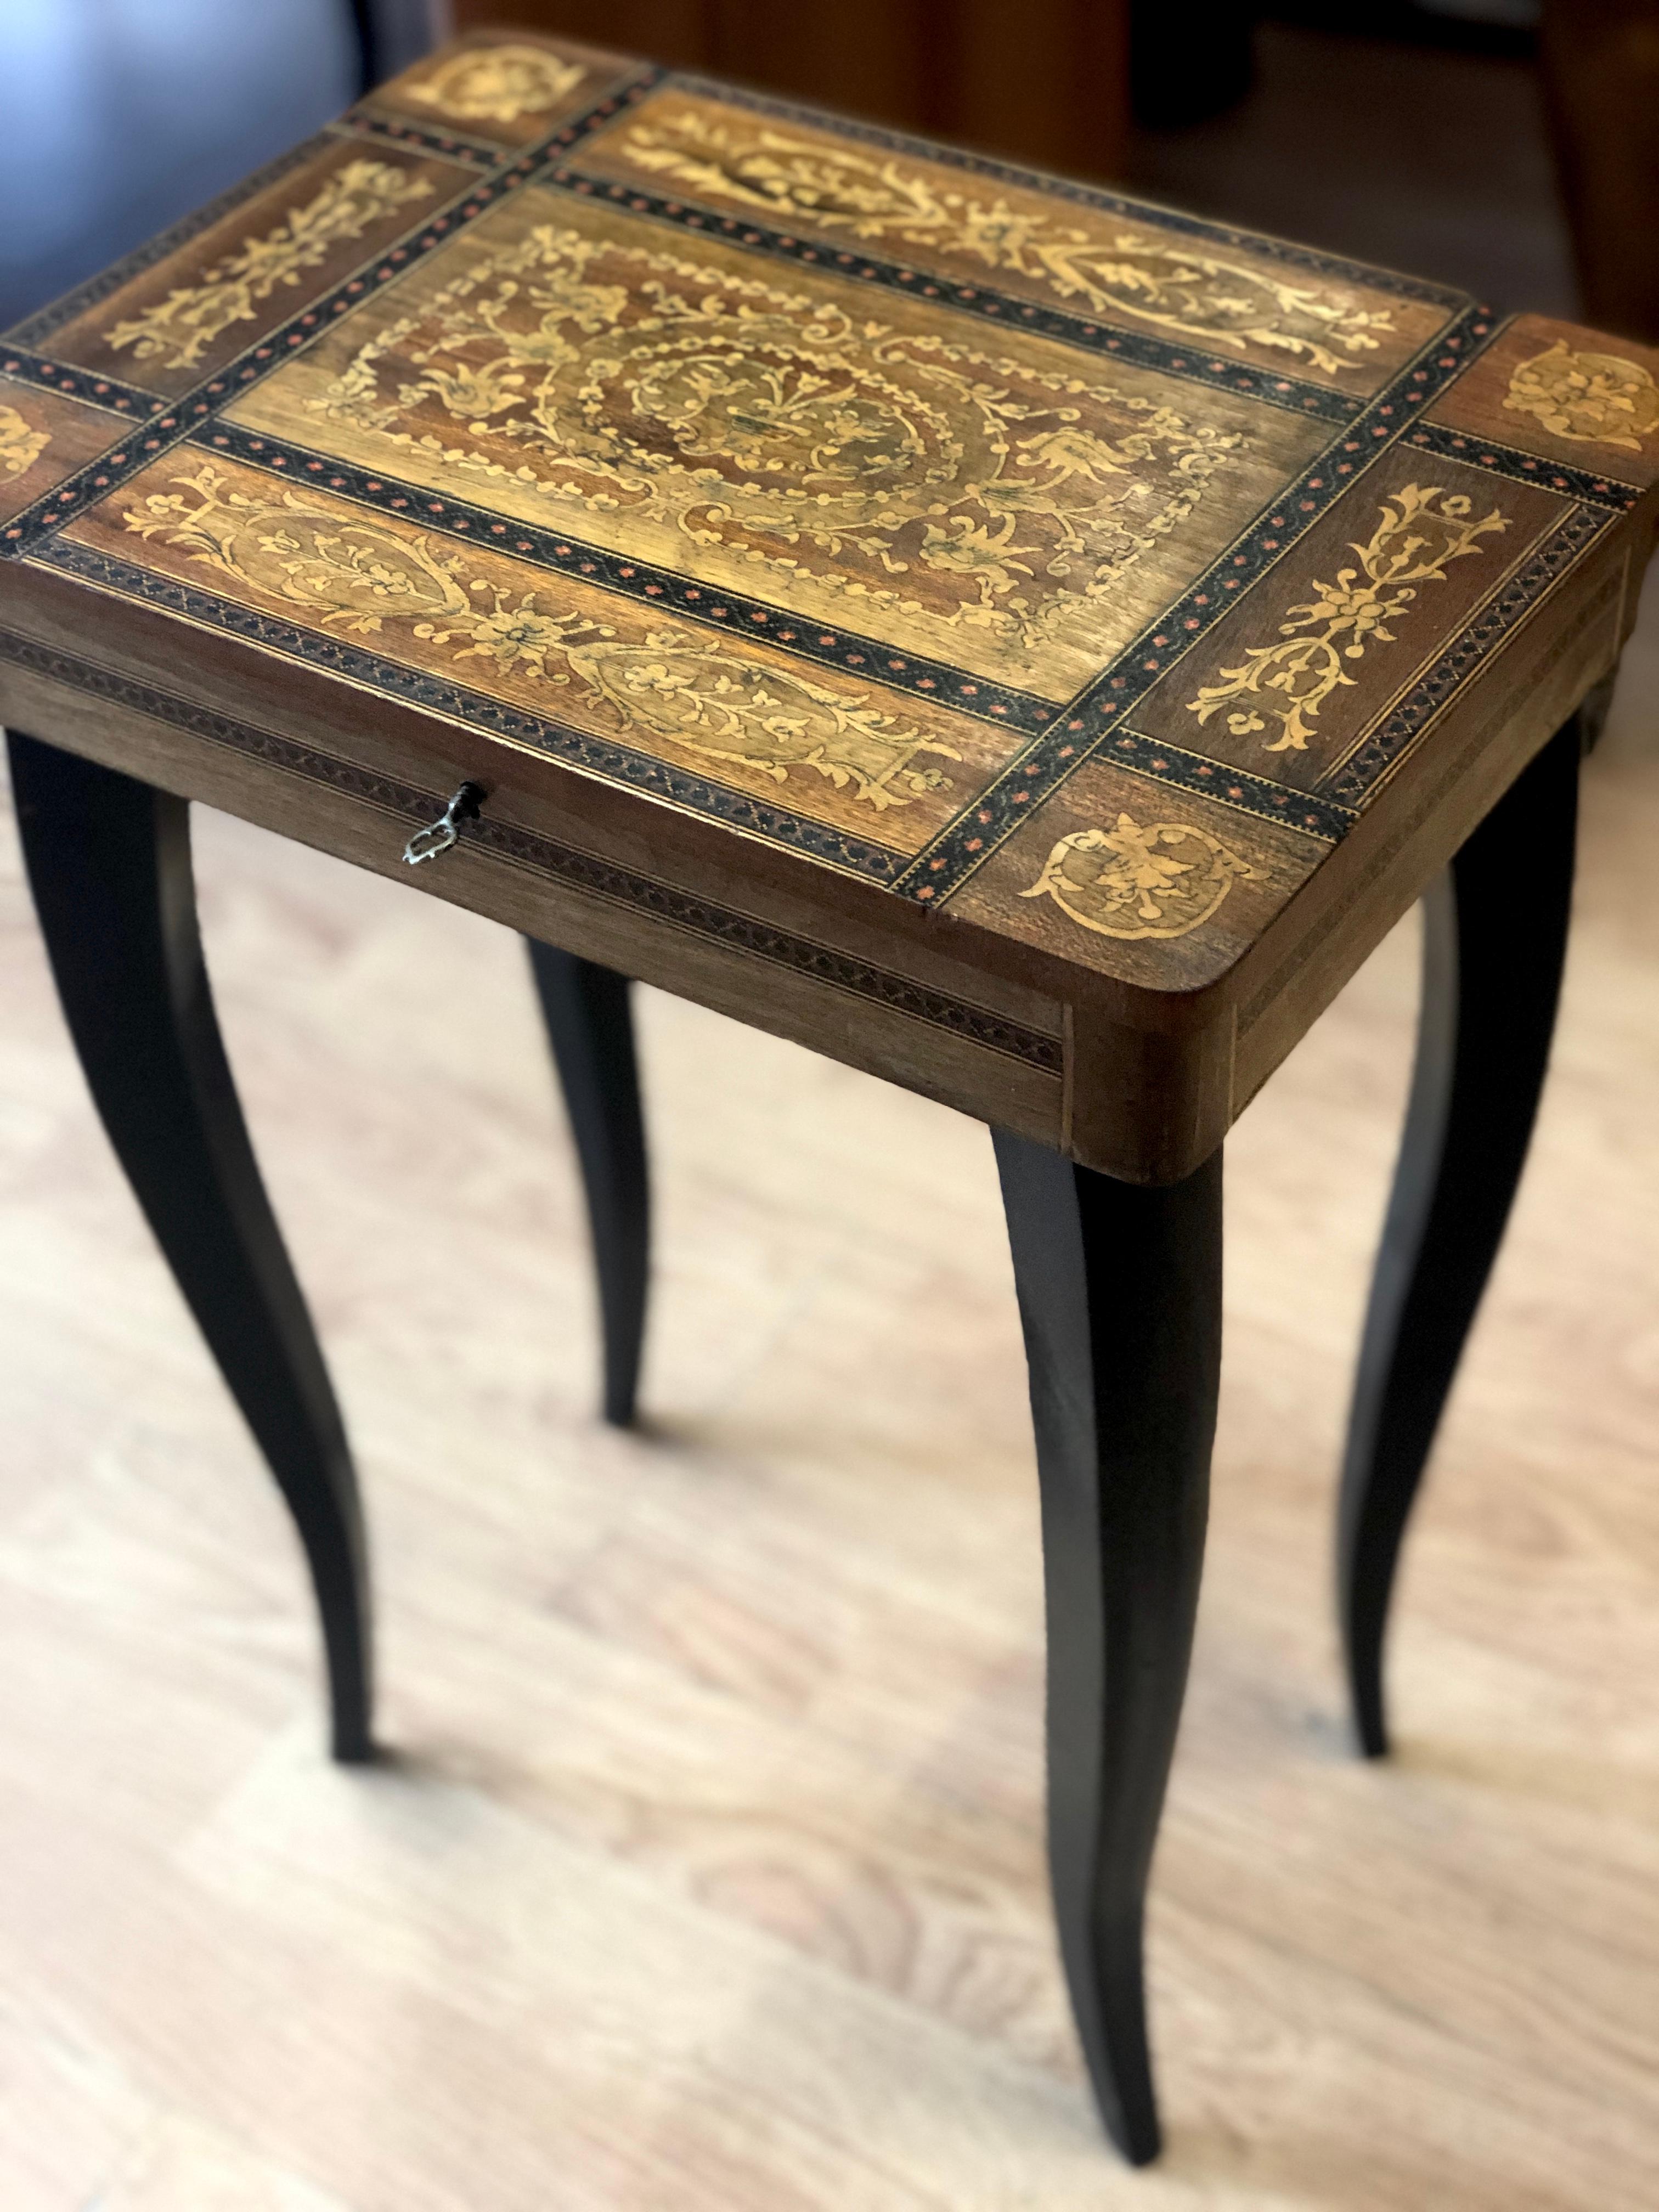 20th century small French rectangular wood side or end table with decorative inlaid top, cabriolet legs, private jewelry compartment upholstered with blue silk and music box with delicate dancer. The original key is available.